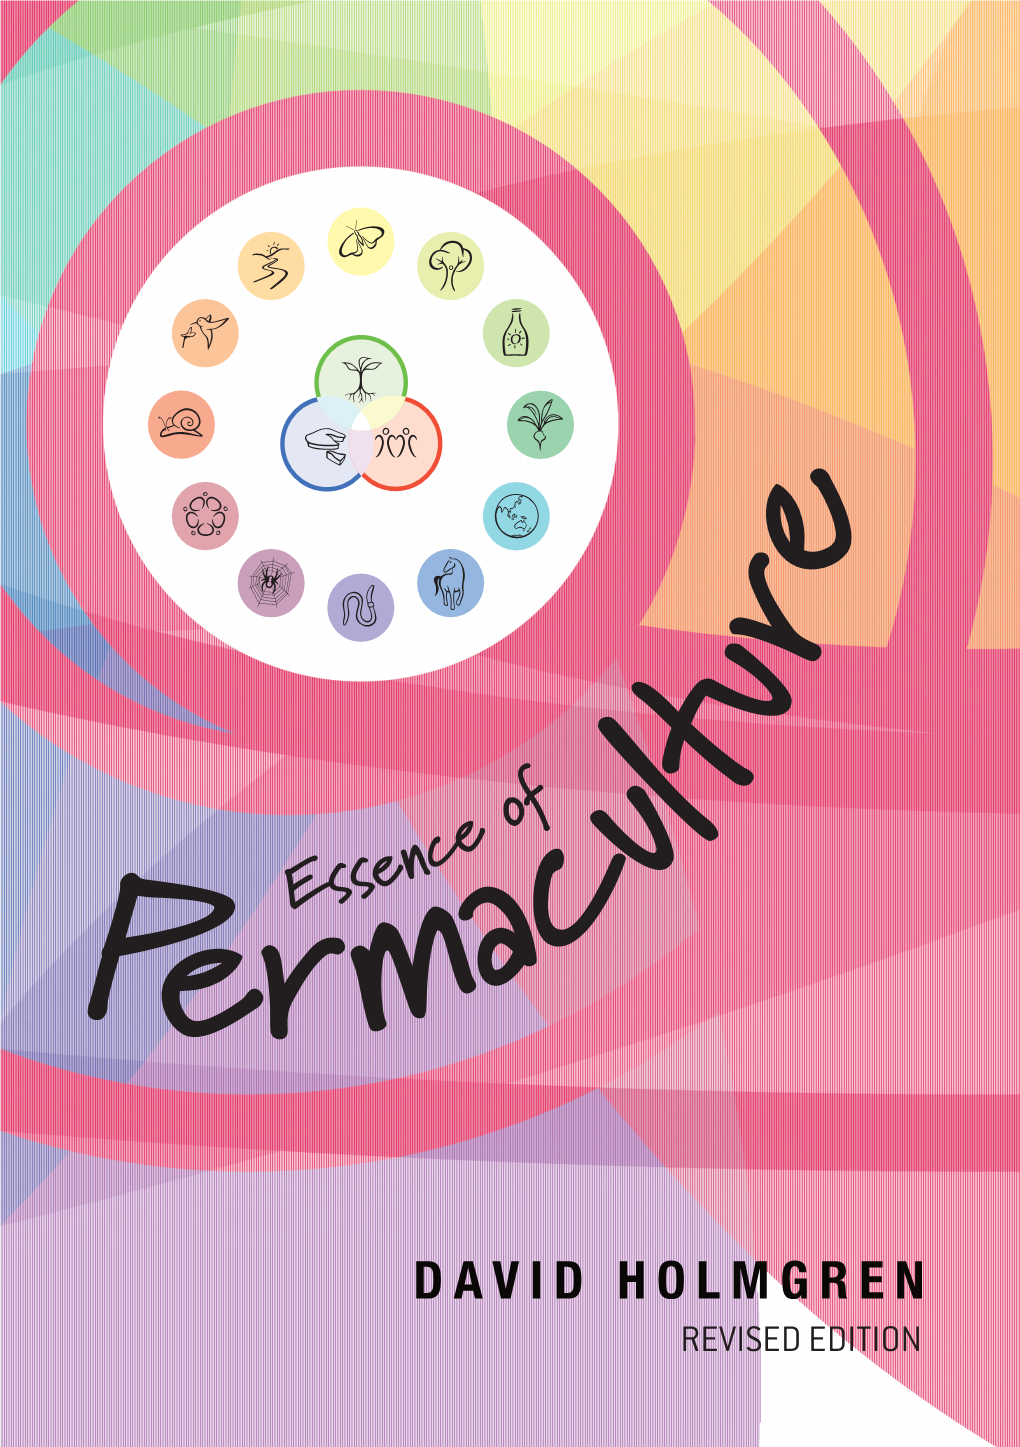 Essence of Permaculture Was Created As an Accessible Introduction to Both LAND BUILDING the Permaculture Concept and the Principles